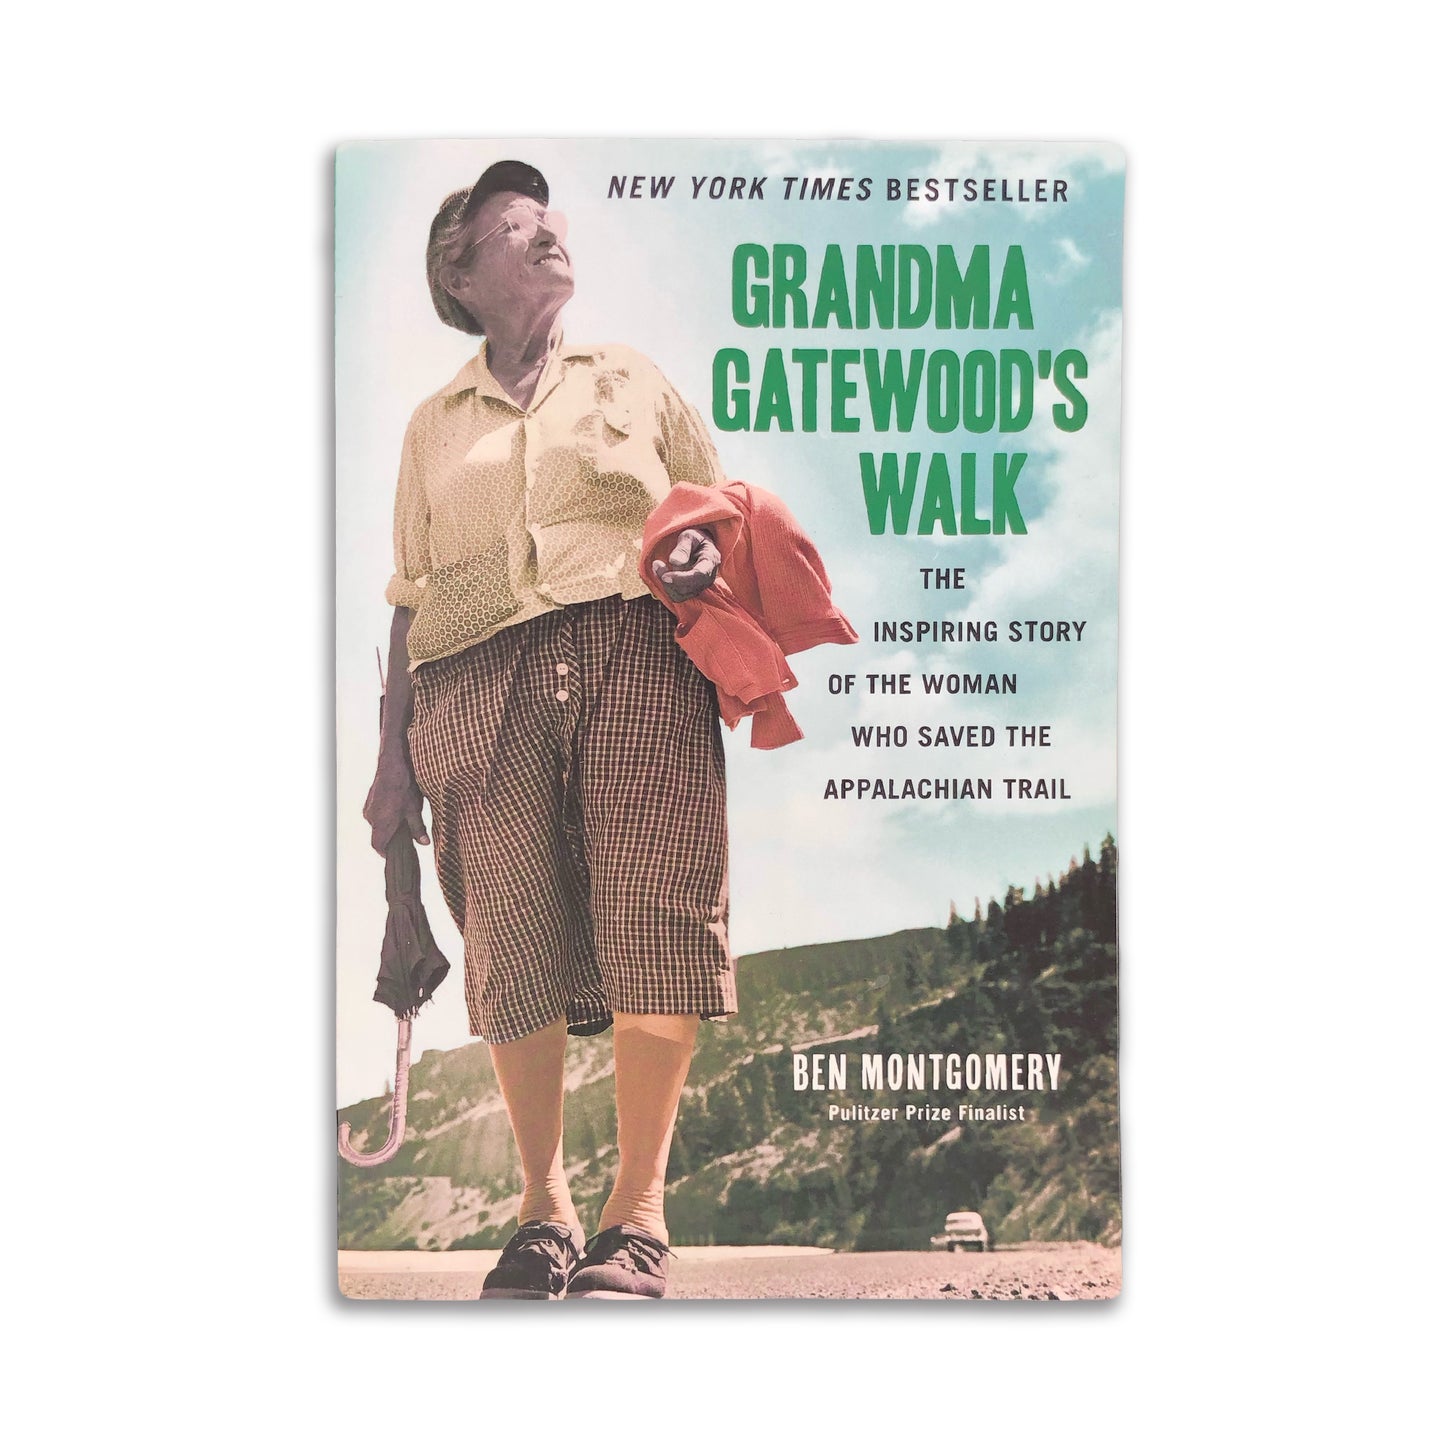 Grandma Gatewood's Walk: The Inspiring Story of the Woman Who Saved the Appalachian Trail - Ben Montgomery (paperback)